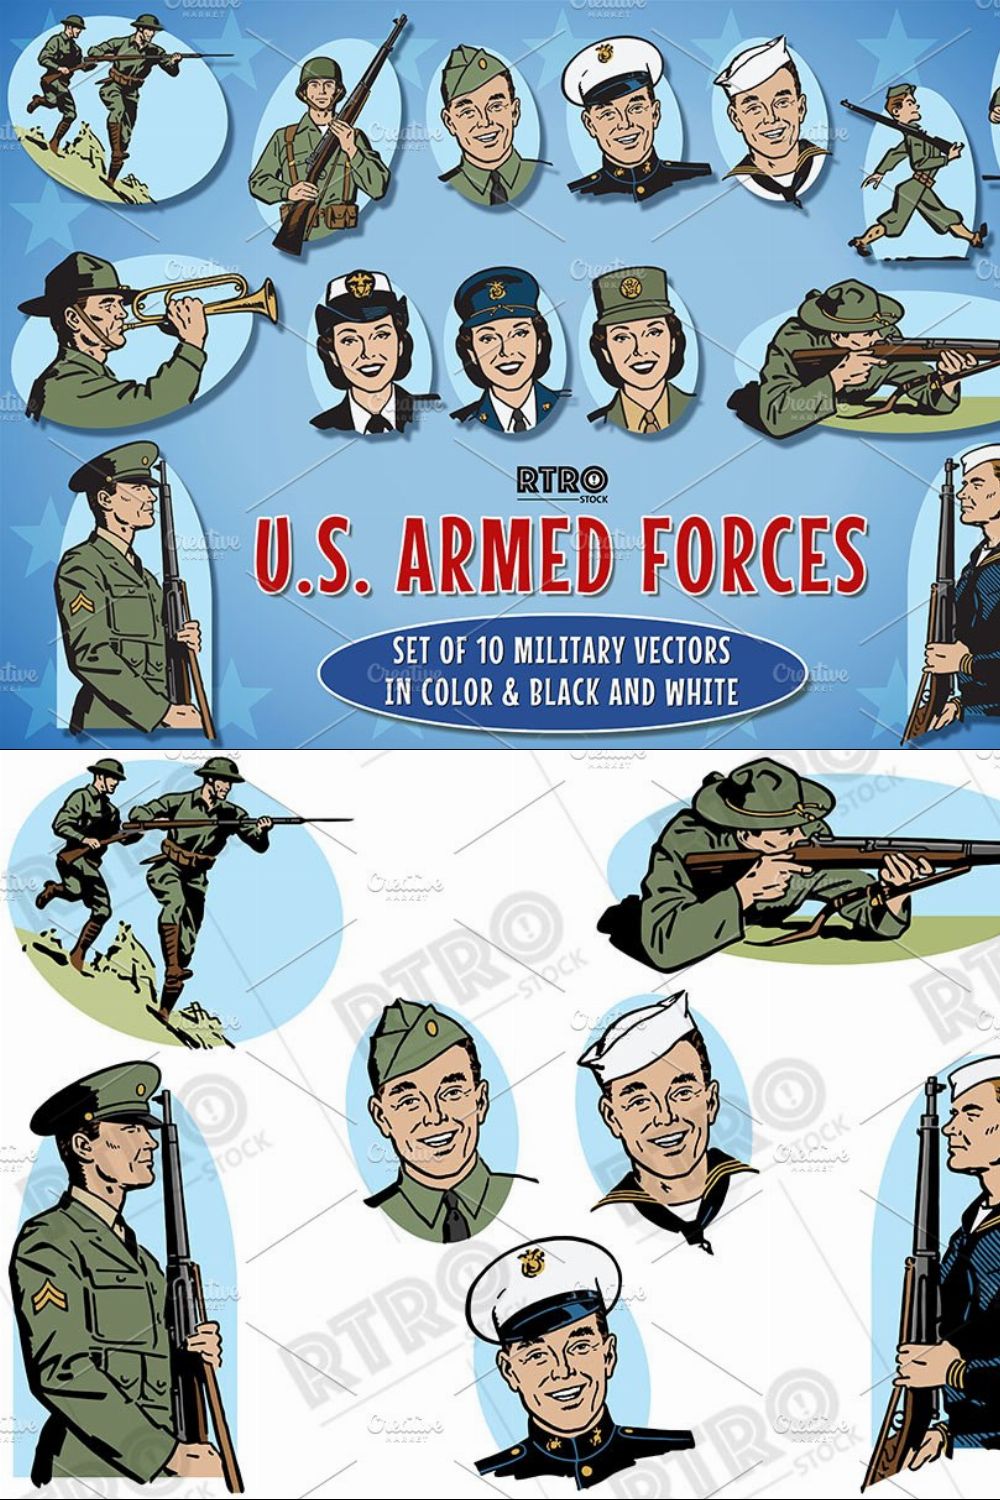 RTRO U.S. Armed Forces 1 pinterest preview image.